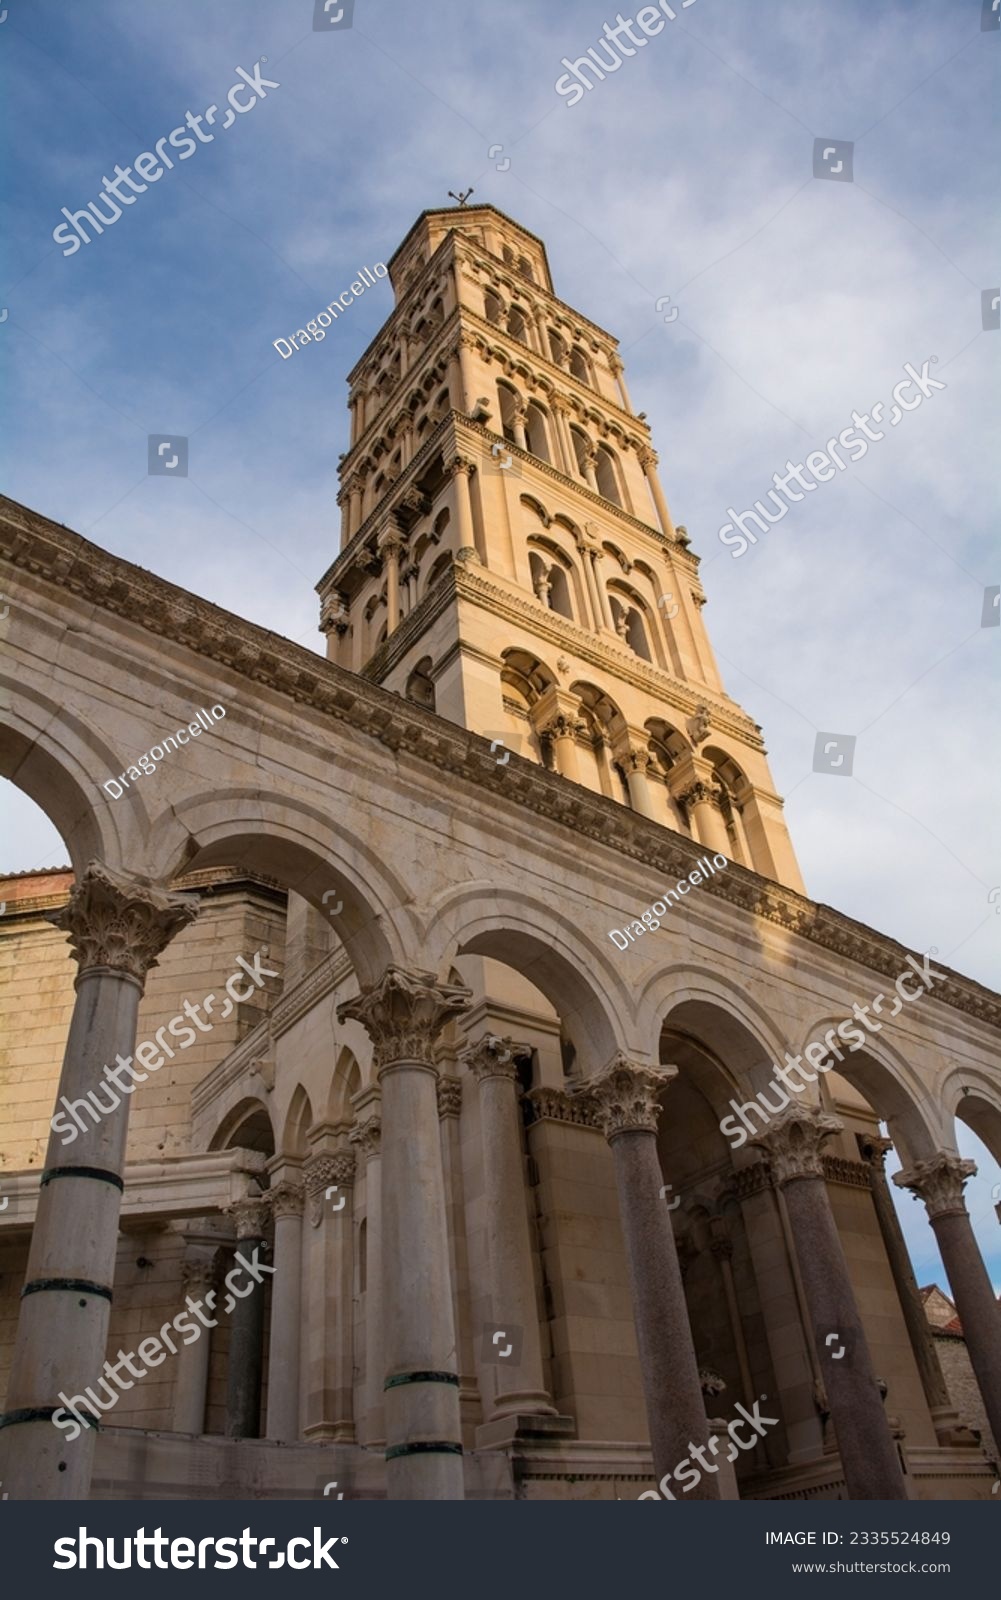 The Romanesque bell tower of the Cathedral of Saint Domnius - Katedrala Svetog Duje - in Split, Croatia. Located within the Diocletian Palace. Seen from Peristil  #2335524849